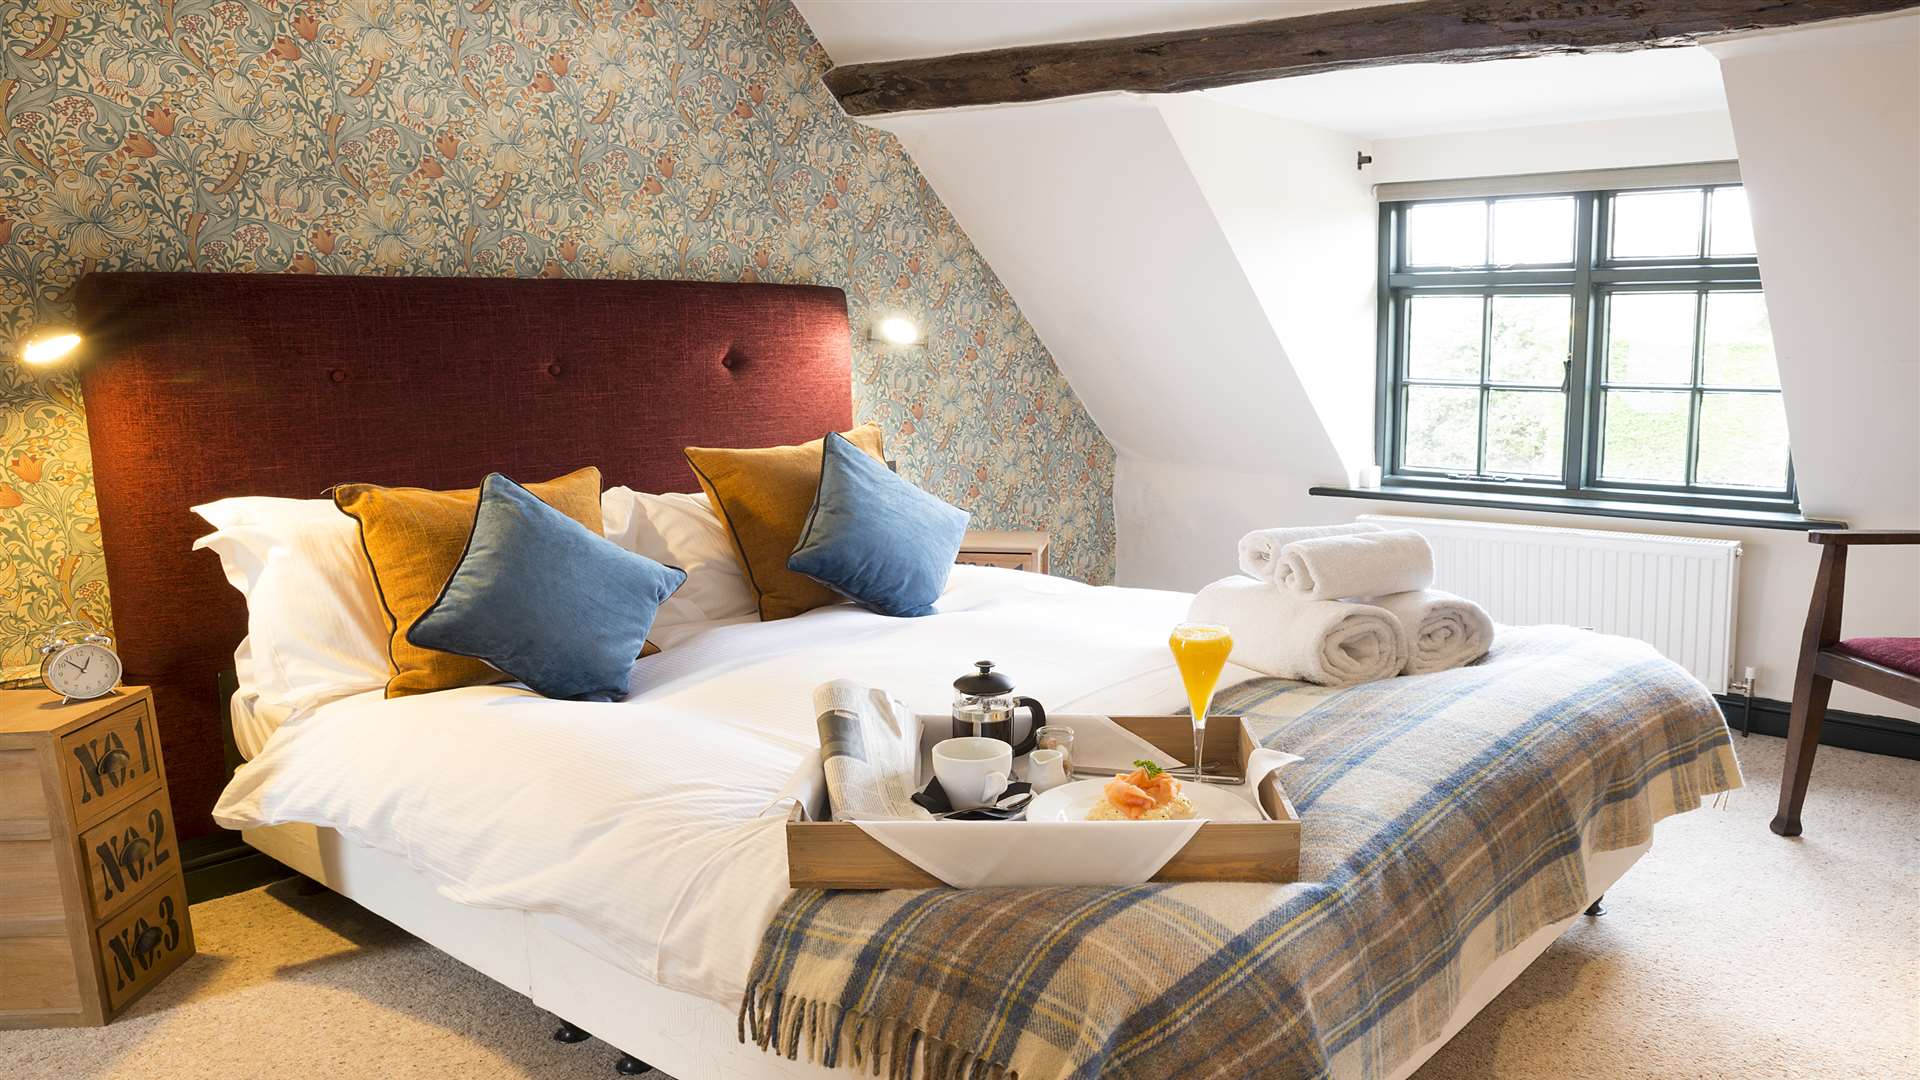 A cosy bedroom at the Yew Tree